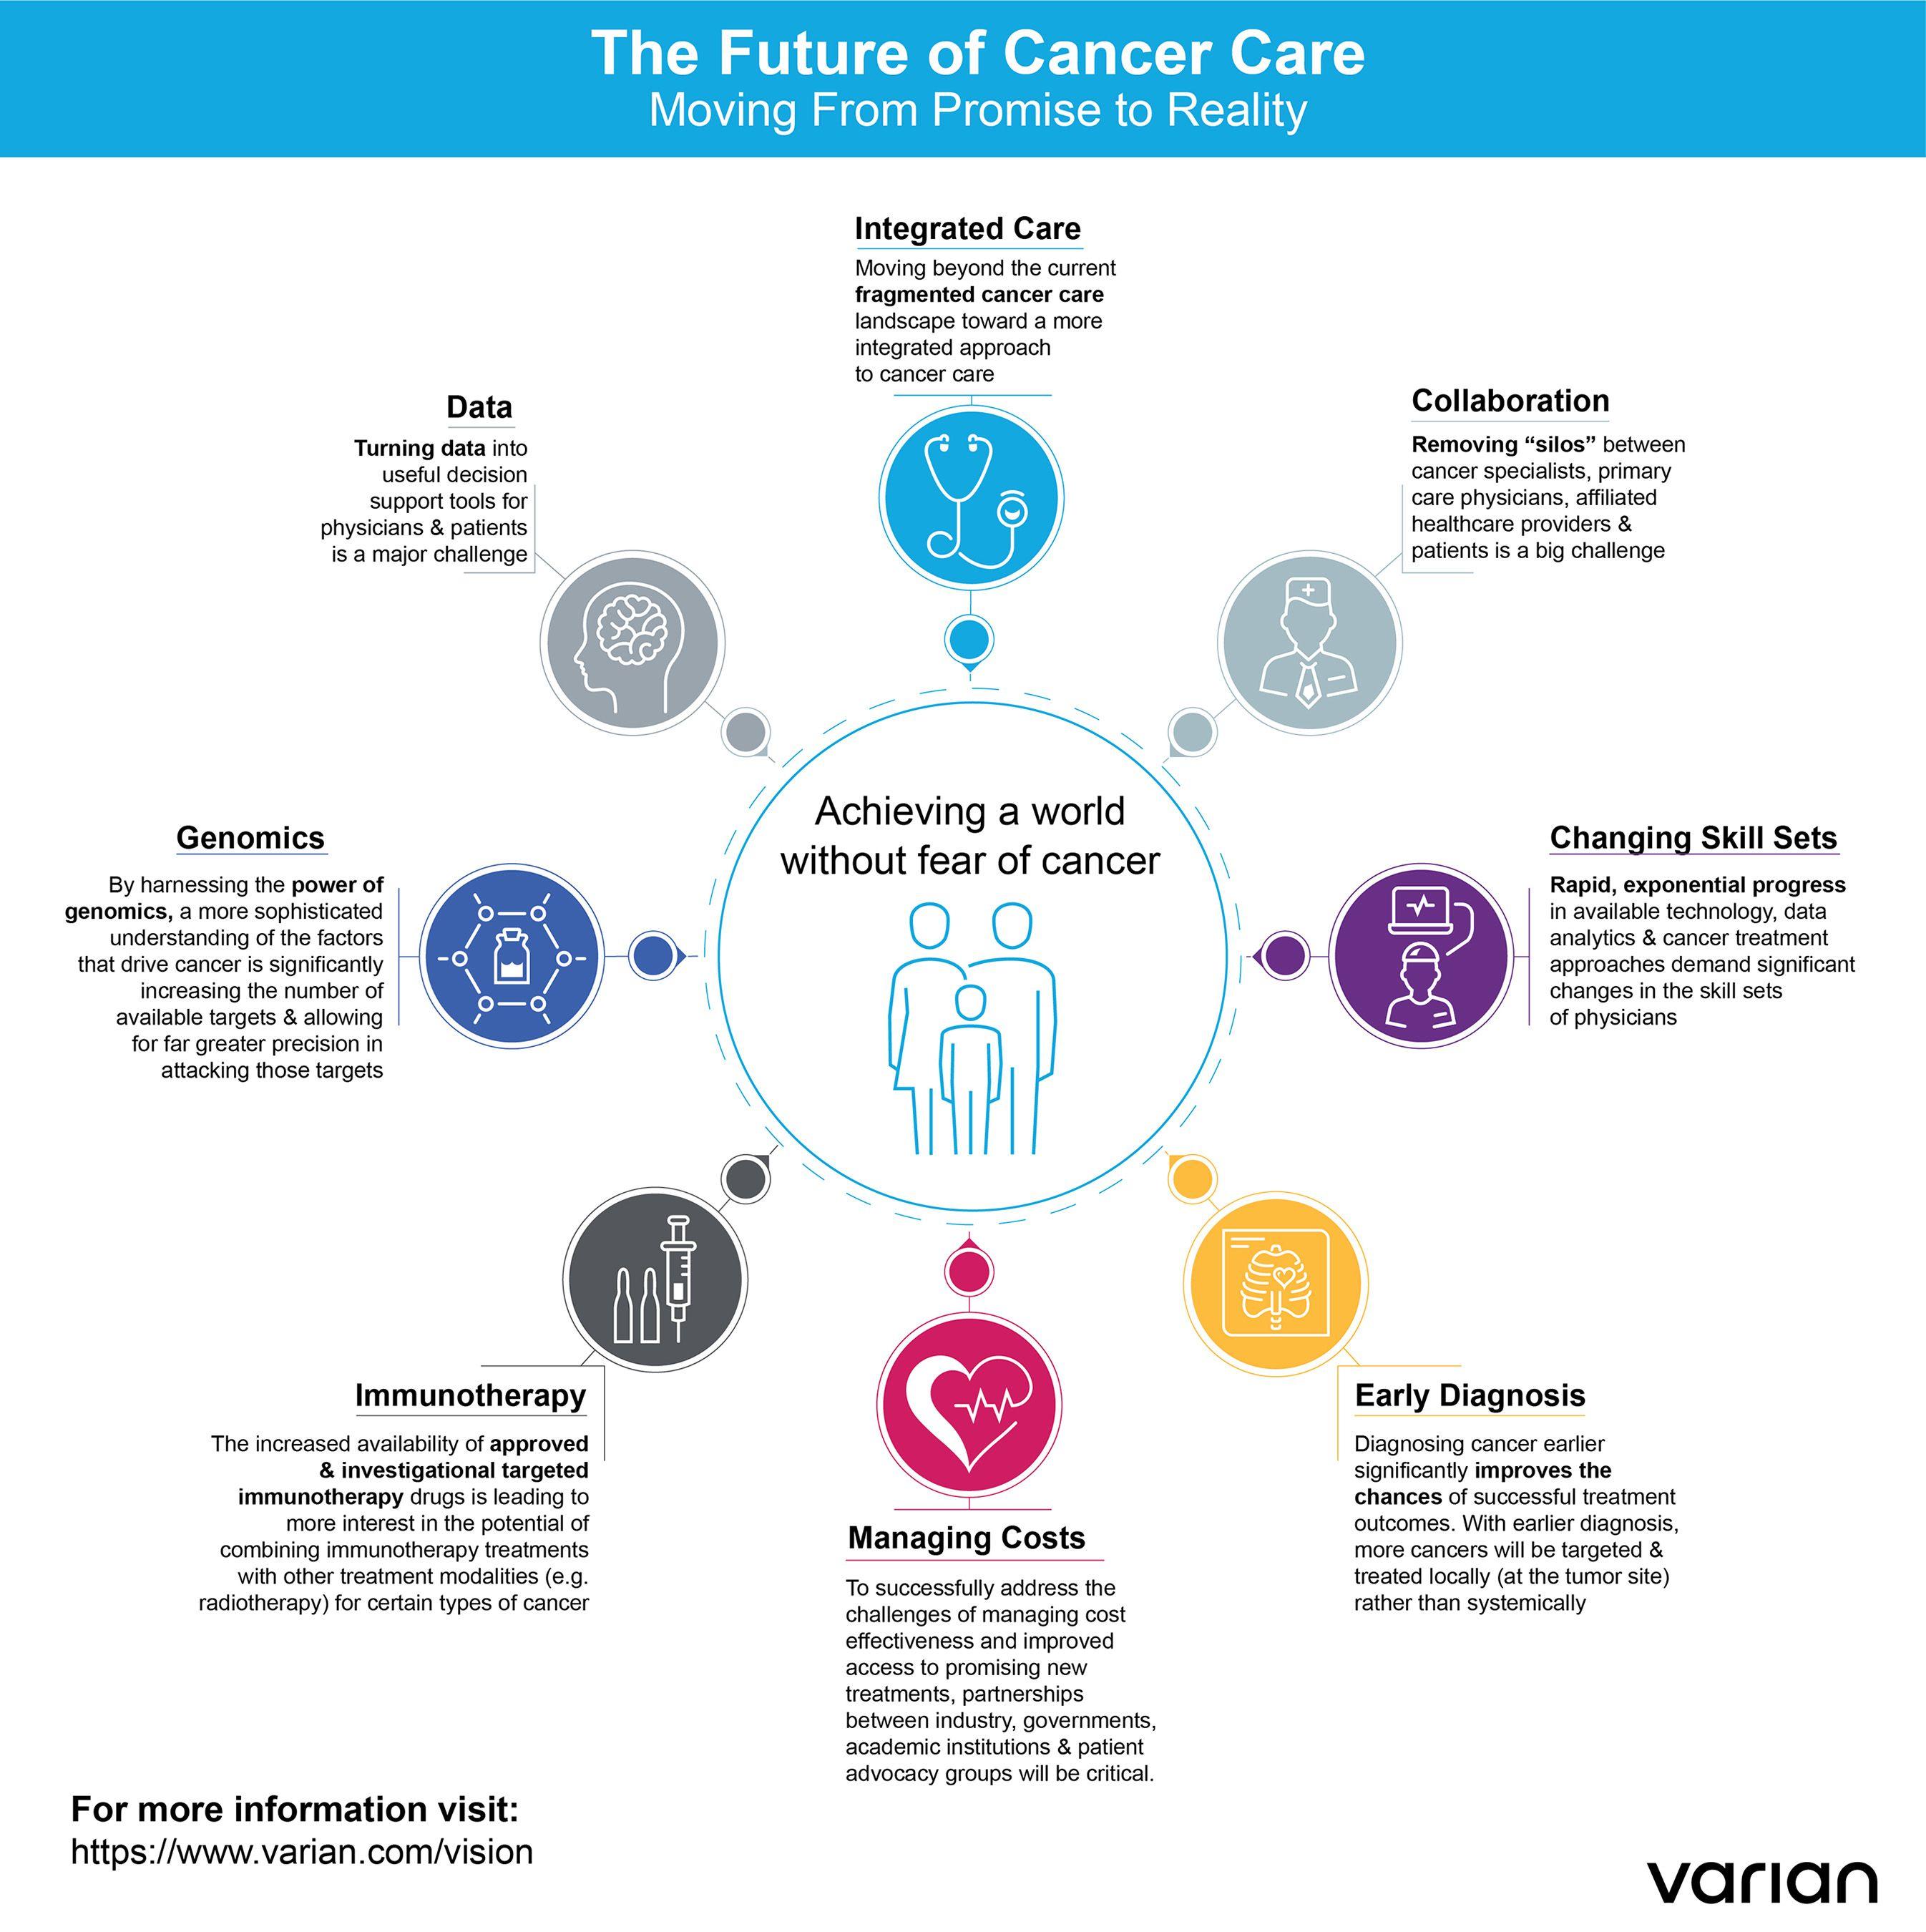 Varian Logo - Varian Shares Vision of a World Without Fear of Cancer | Varian ...